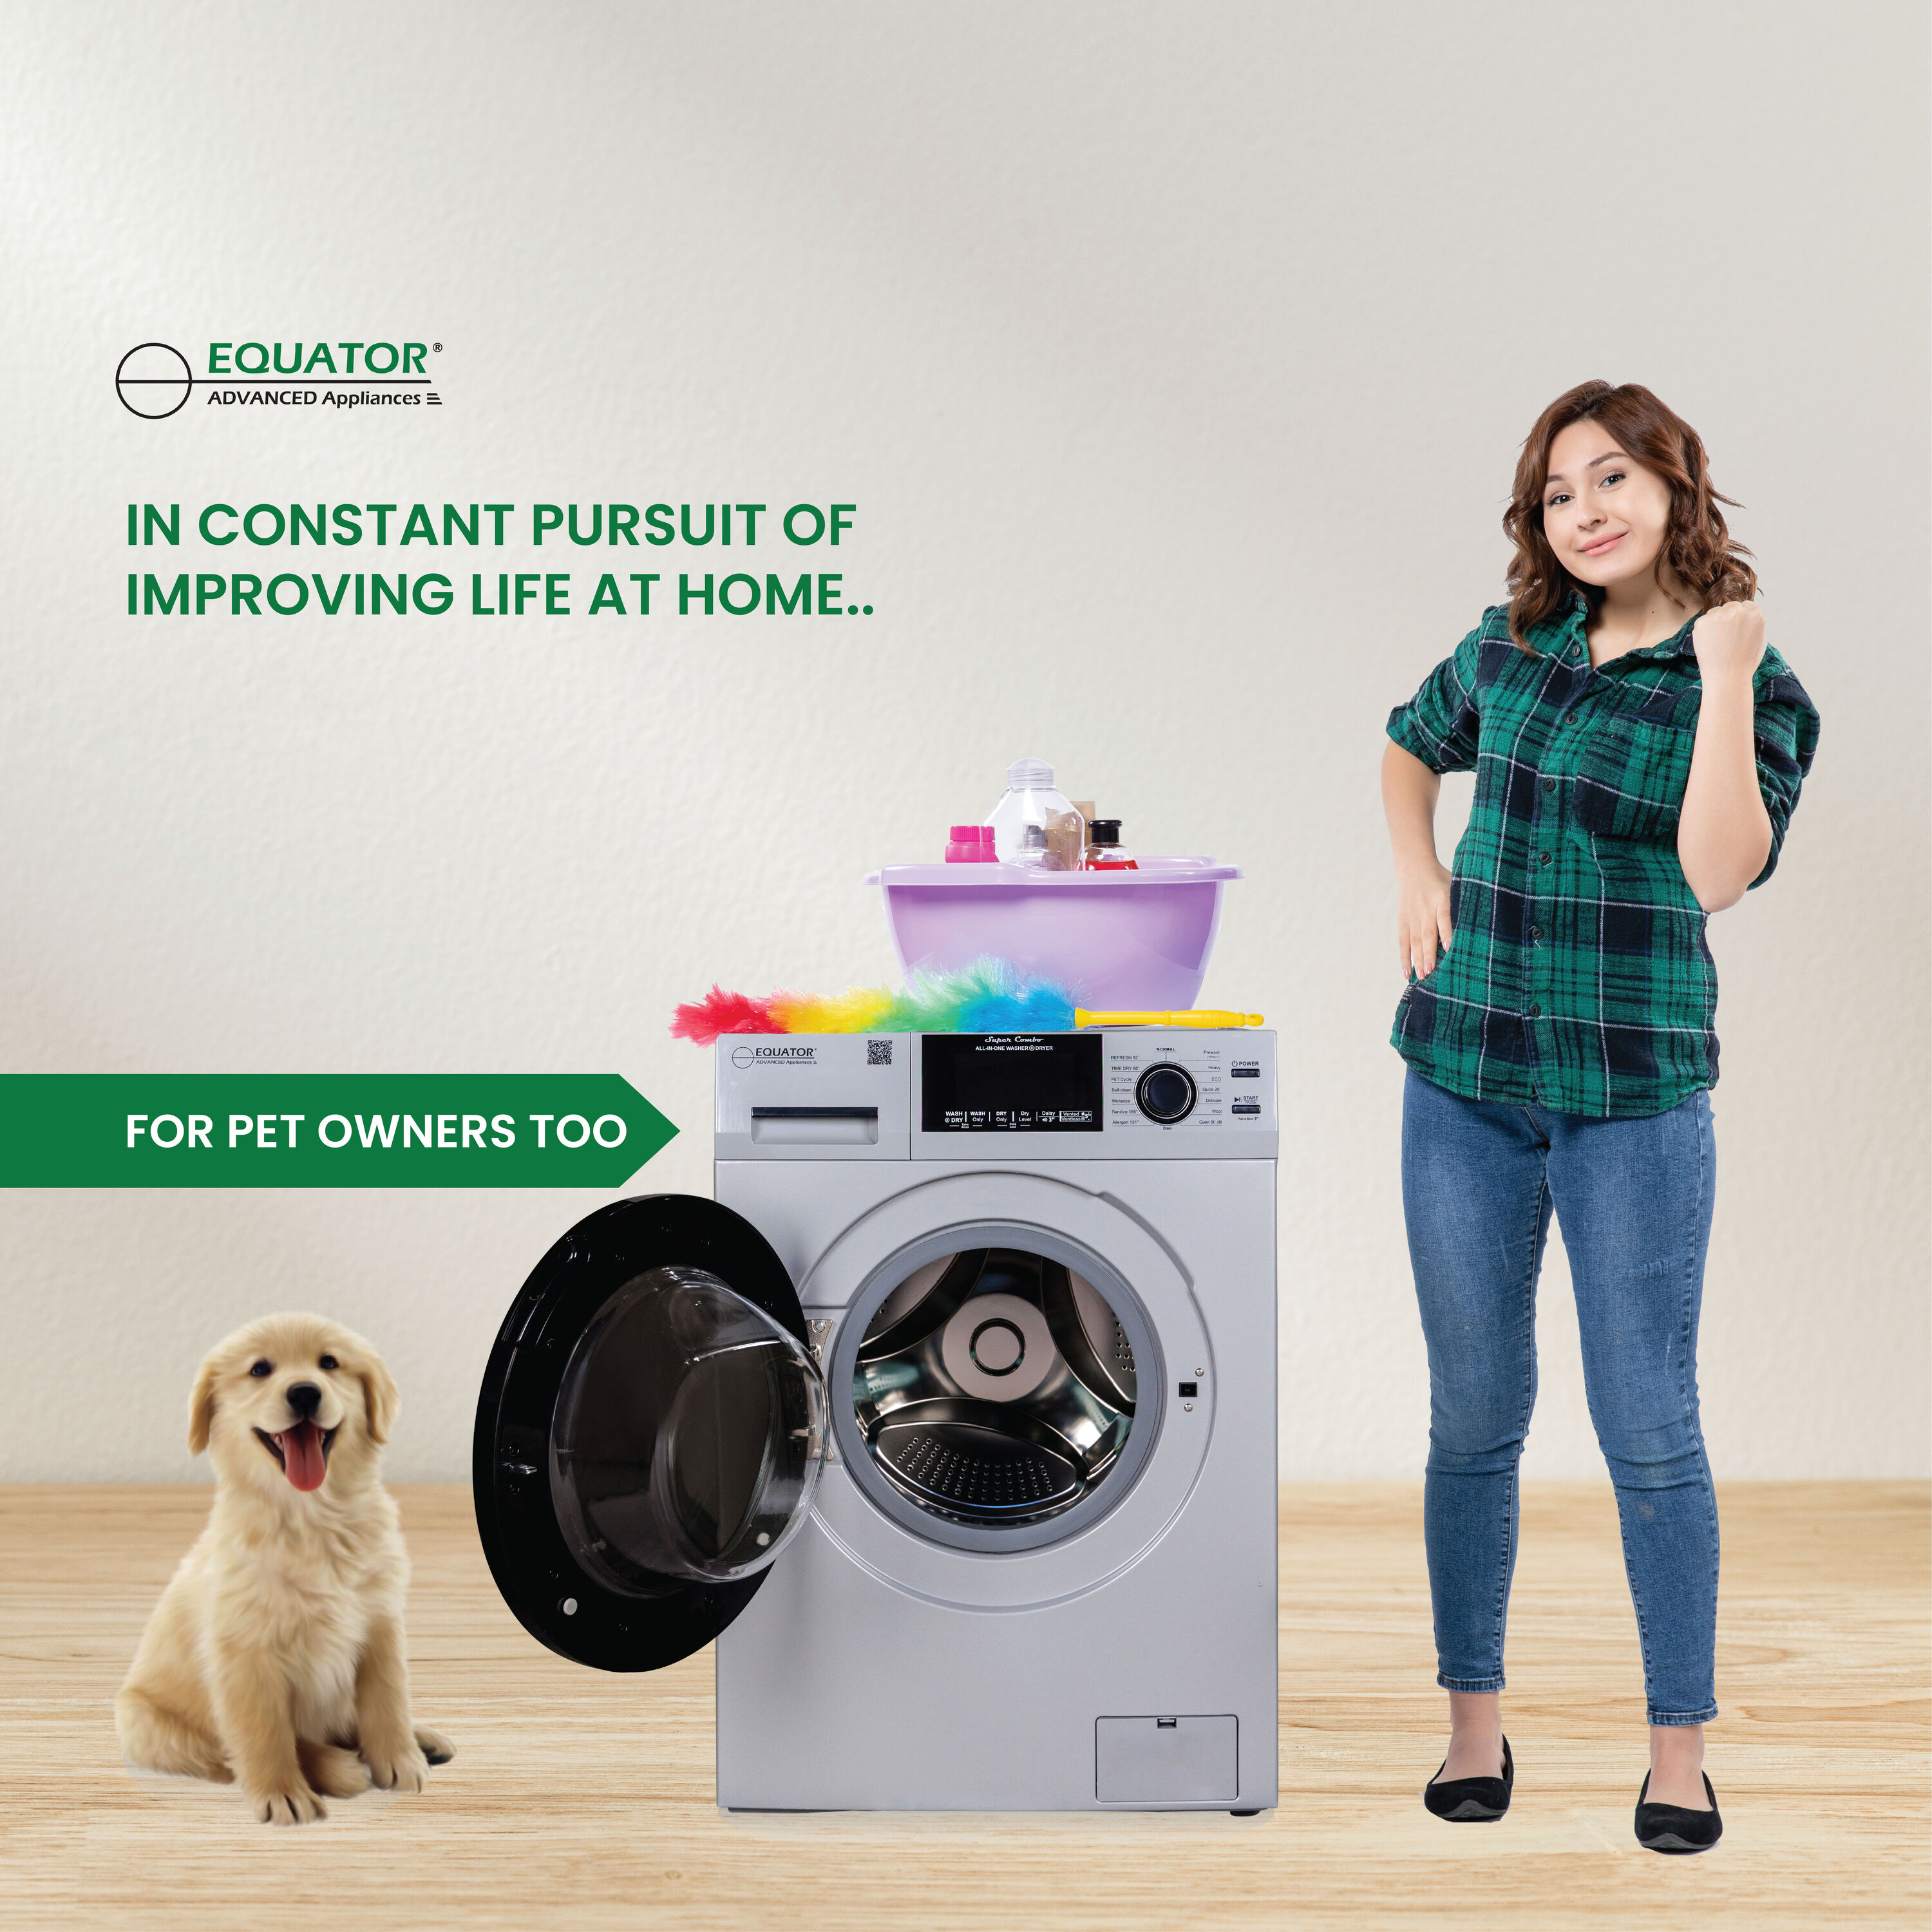 Uniwasher, Inc. - Save all your quarters for laundry day! 💡 This